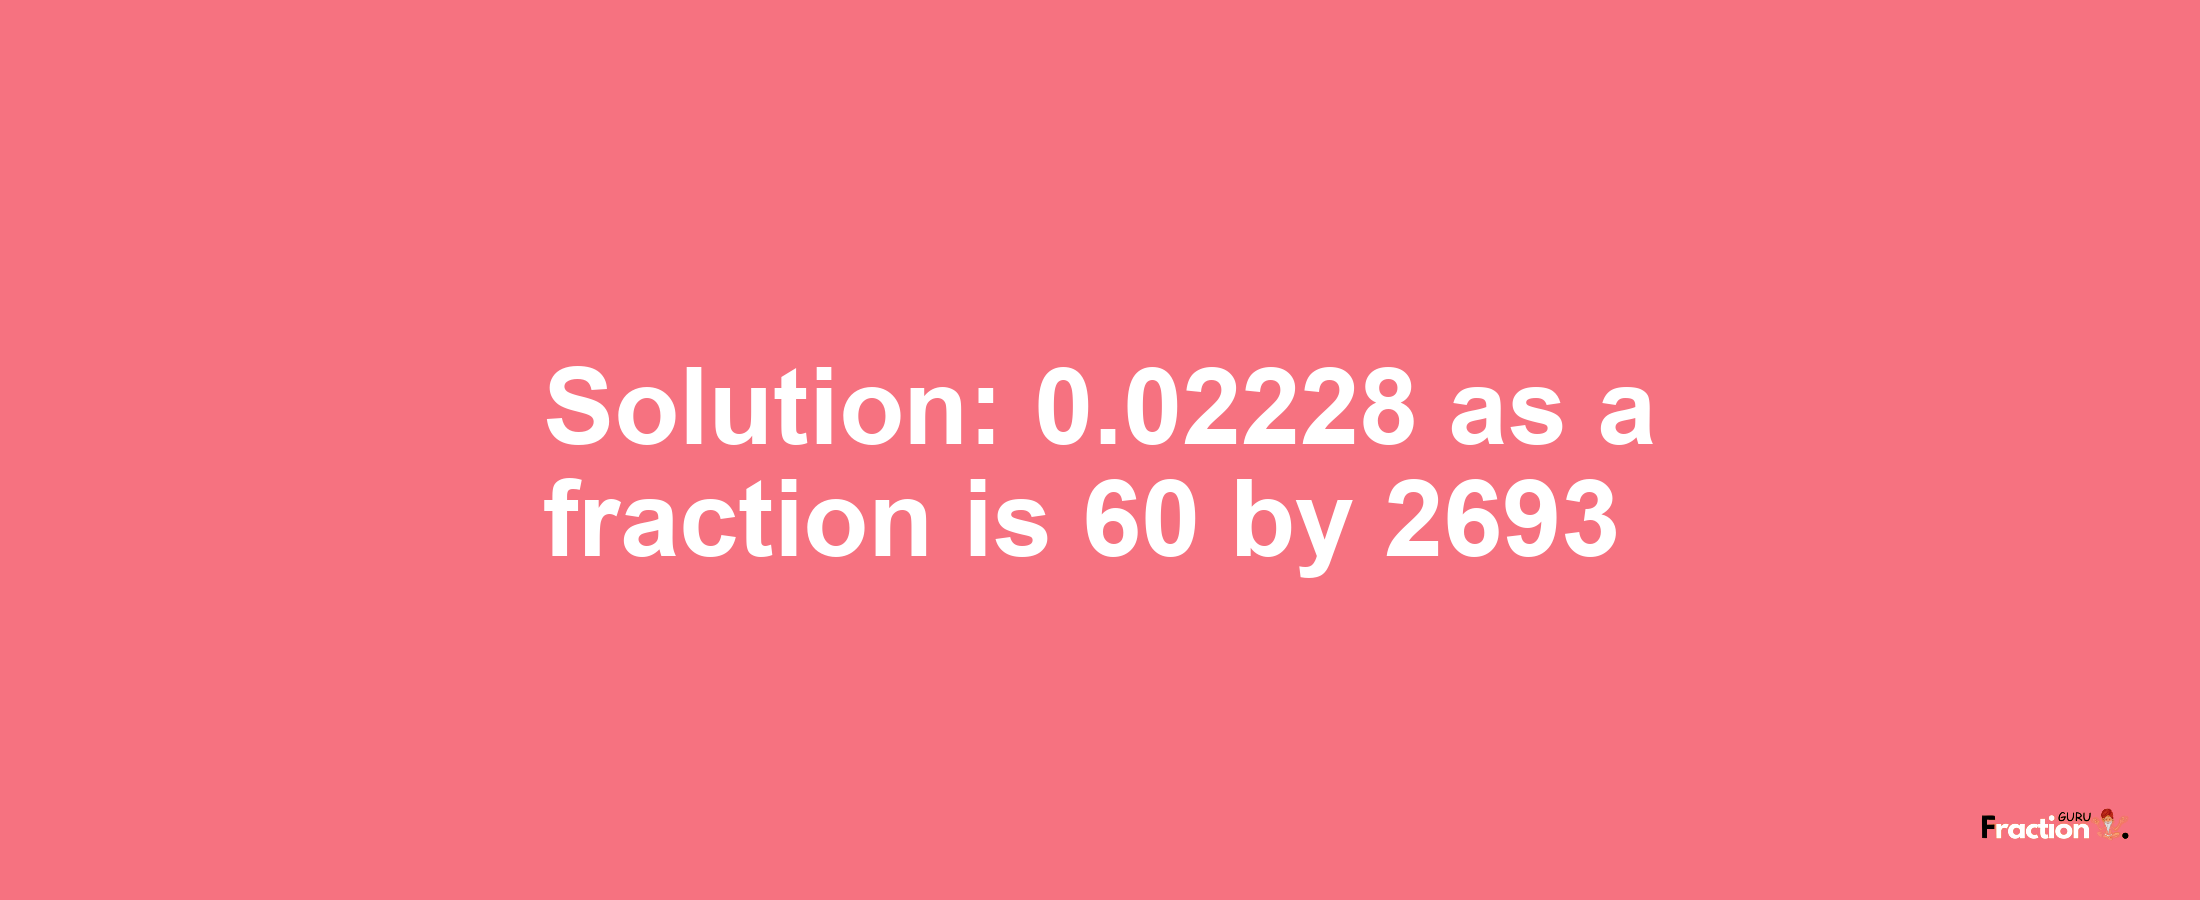 Solution:0.02228 as a fraction is 60/2693